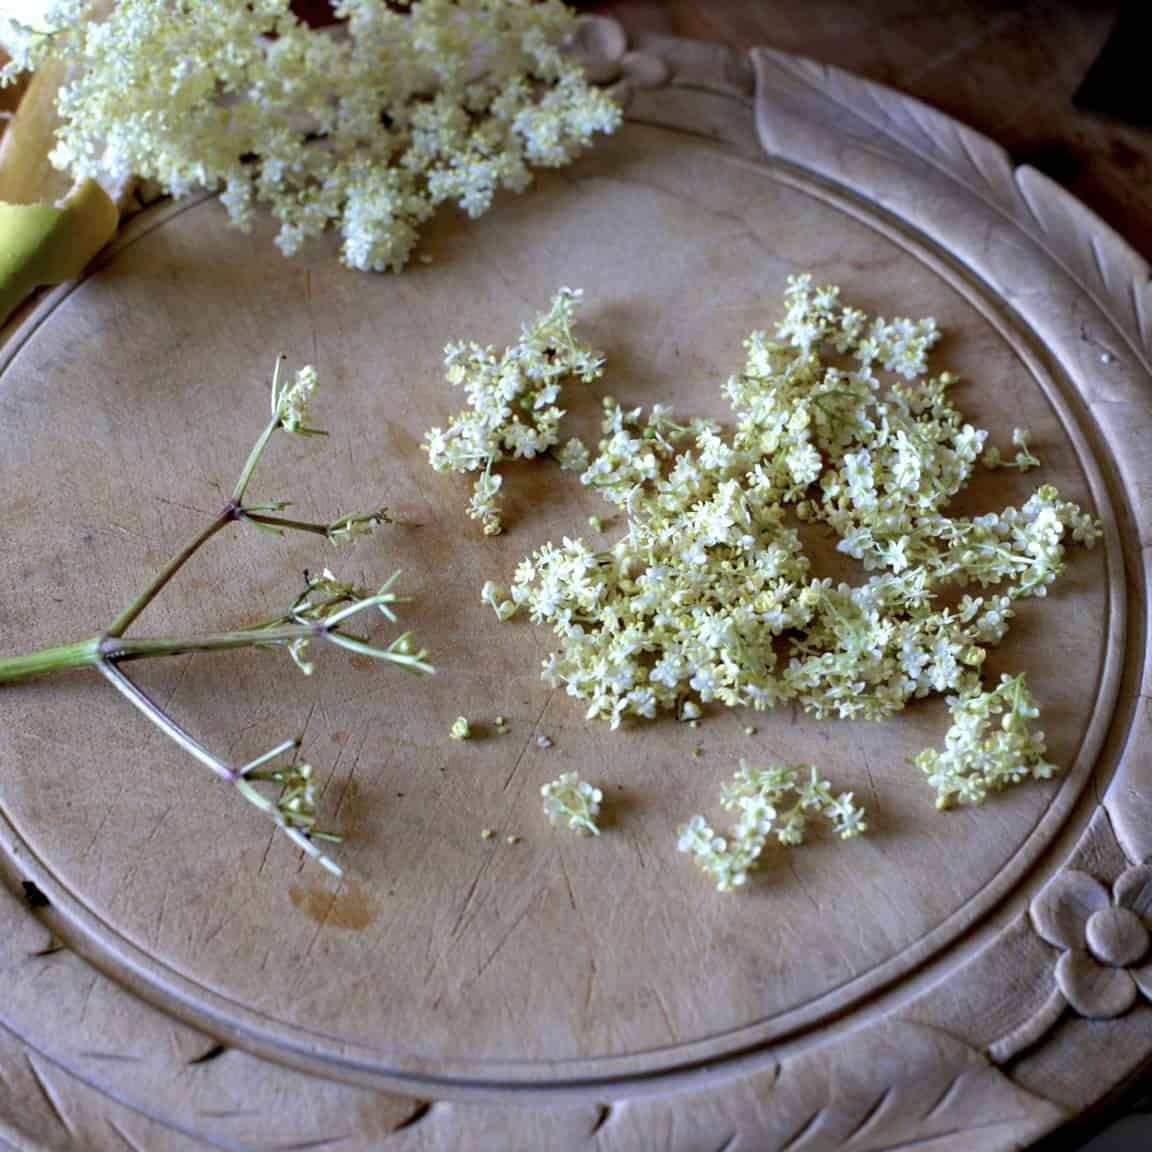 Wooden chopping board with an elderflower head that has had the tiny white blossom removed and piled up on the side